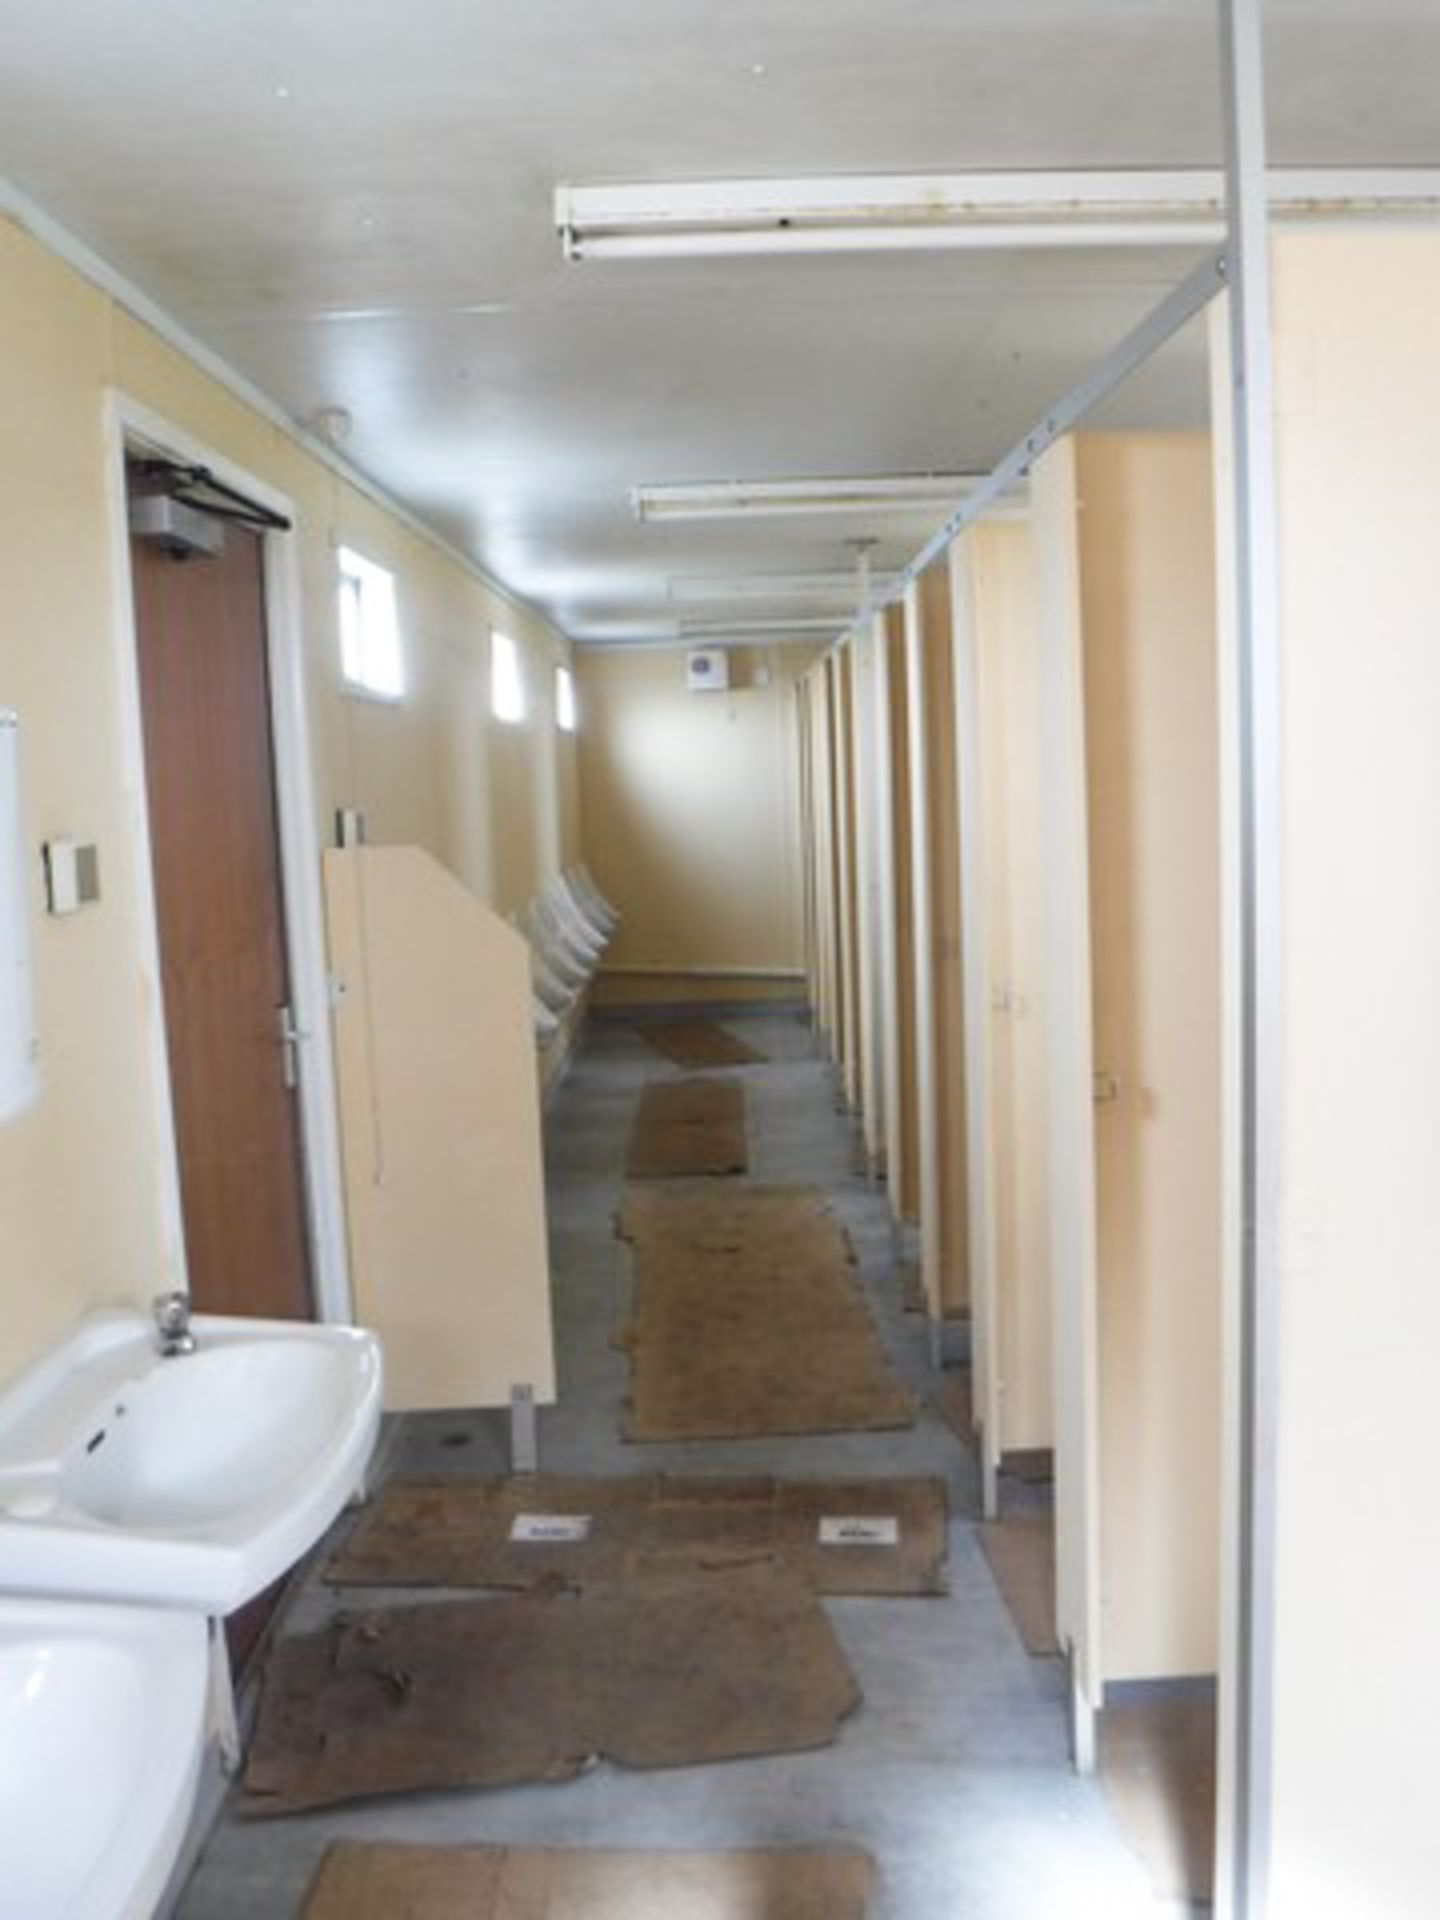 40 X 10 TOILET BLOCK, C/W 10 CUBICALS, 10 URINALS, 9 SINKS, WATER HEATERS TEMP CONTROLLED ANTI-FREEZ - Image 7 of 9